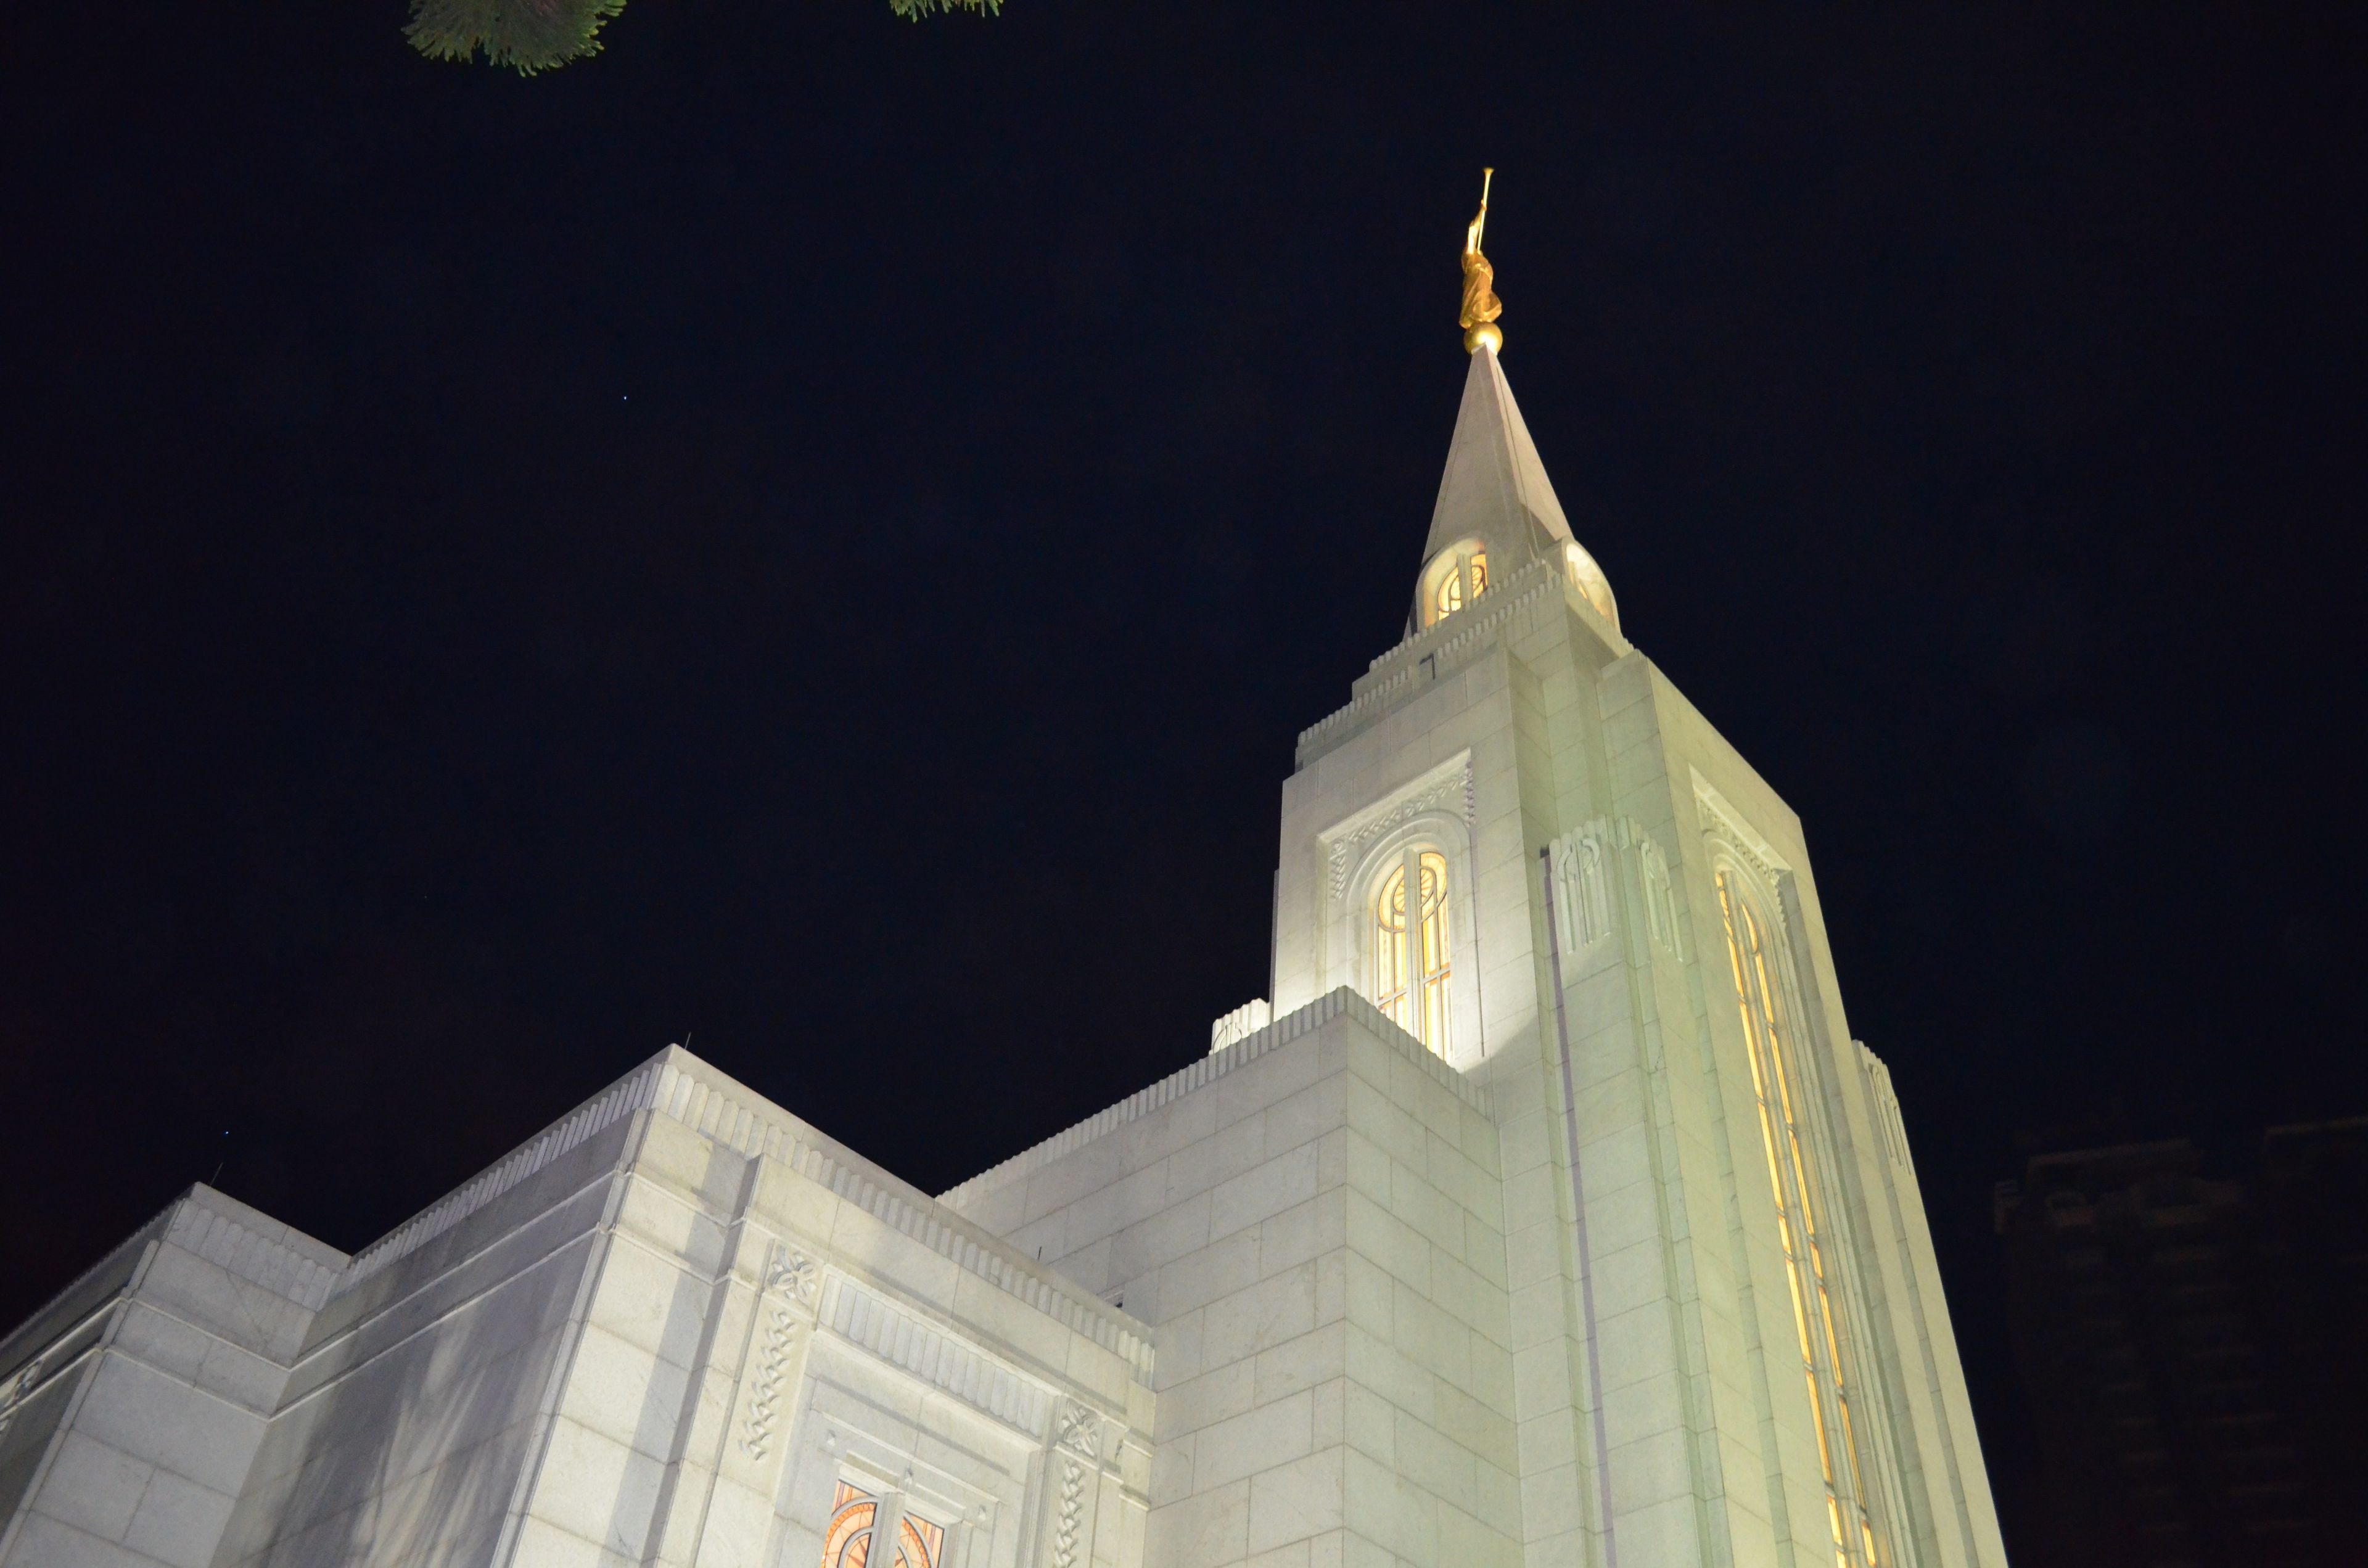 The Curitiba Brazil Temple spire, including the exterior of the temple.